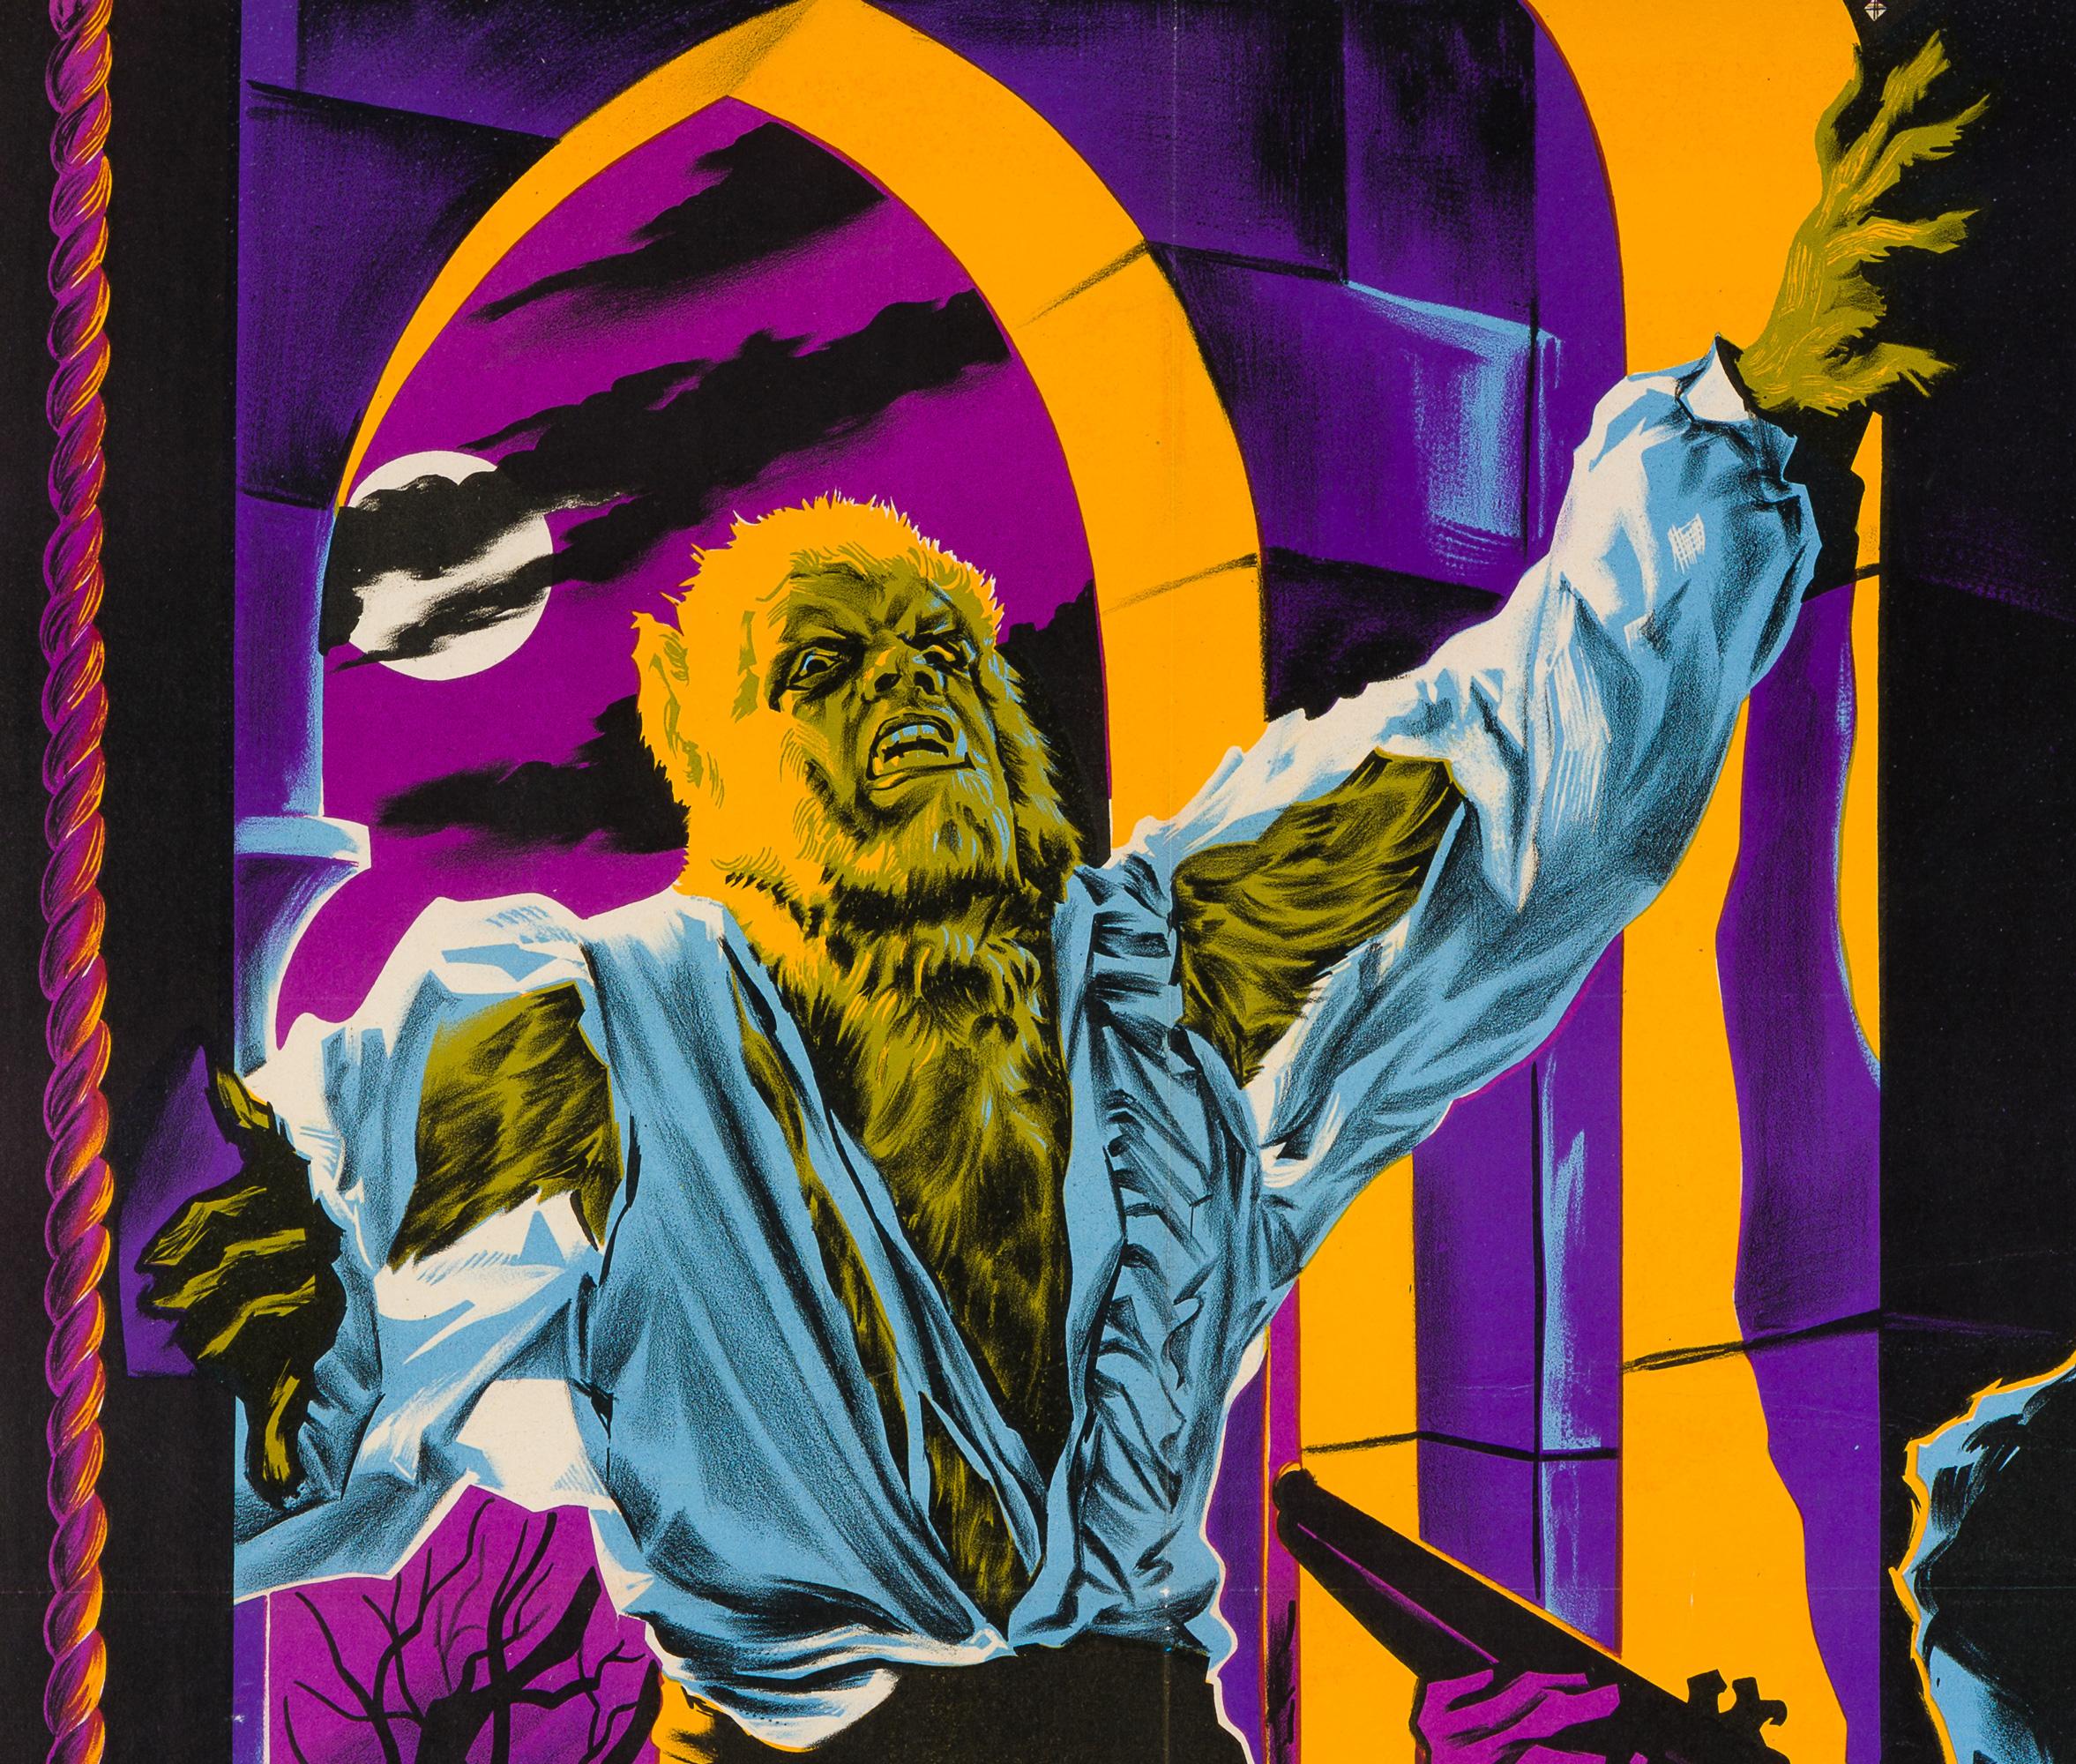 First-year-of-release vintage French movie poster for one of Hammer’s finest monster horrors movies The Curse of the Werewolf starring Clifford Evans and Oliver Reed. Super deep, rich graphics.

Actual poster size 23 1/2 x 31 inches (25 3/4 x 33